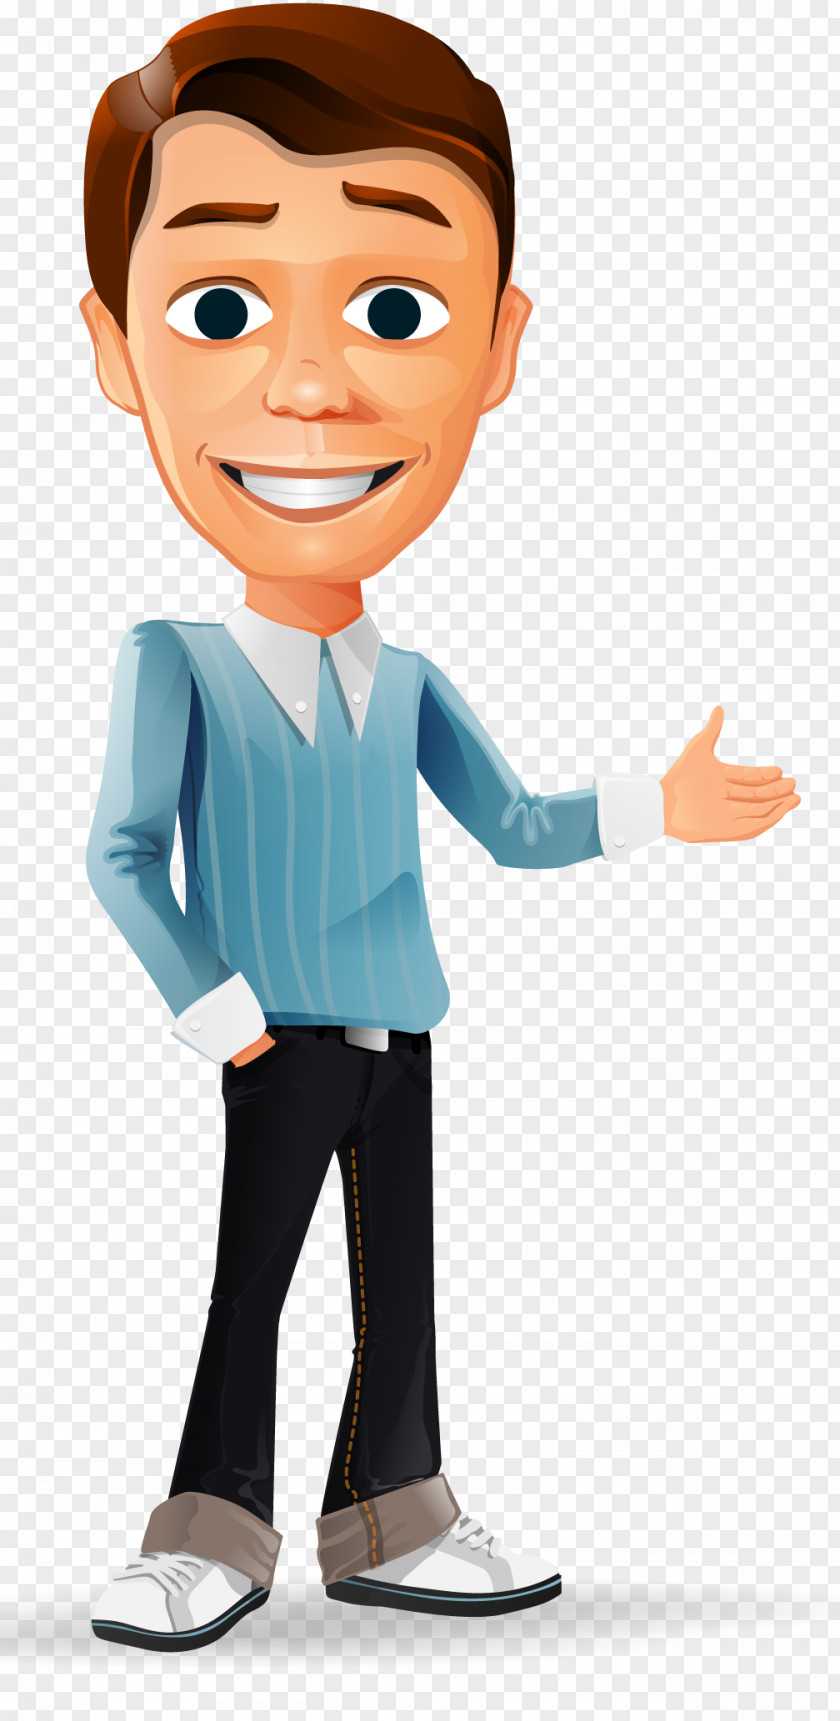 Animation Transparent Images Cartoon Businessperson Character Model Sheet PNG